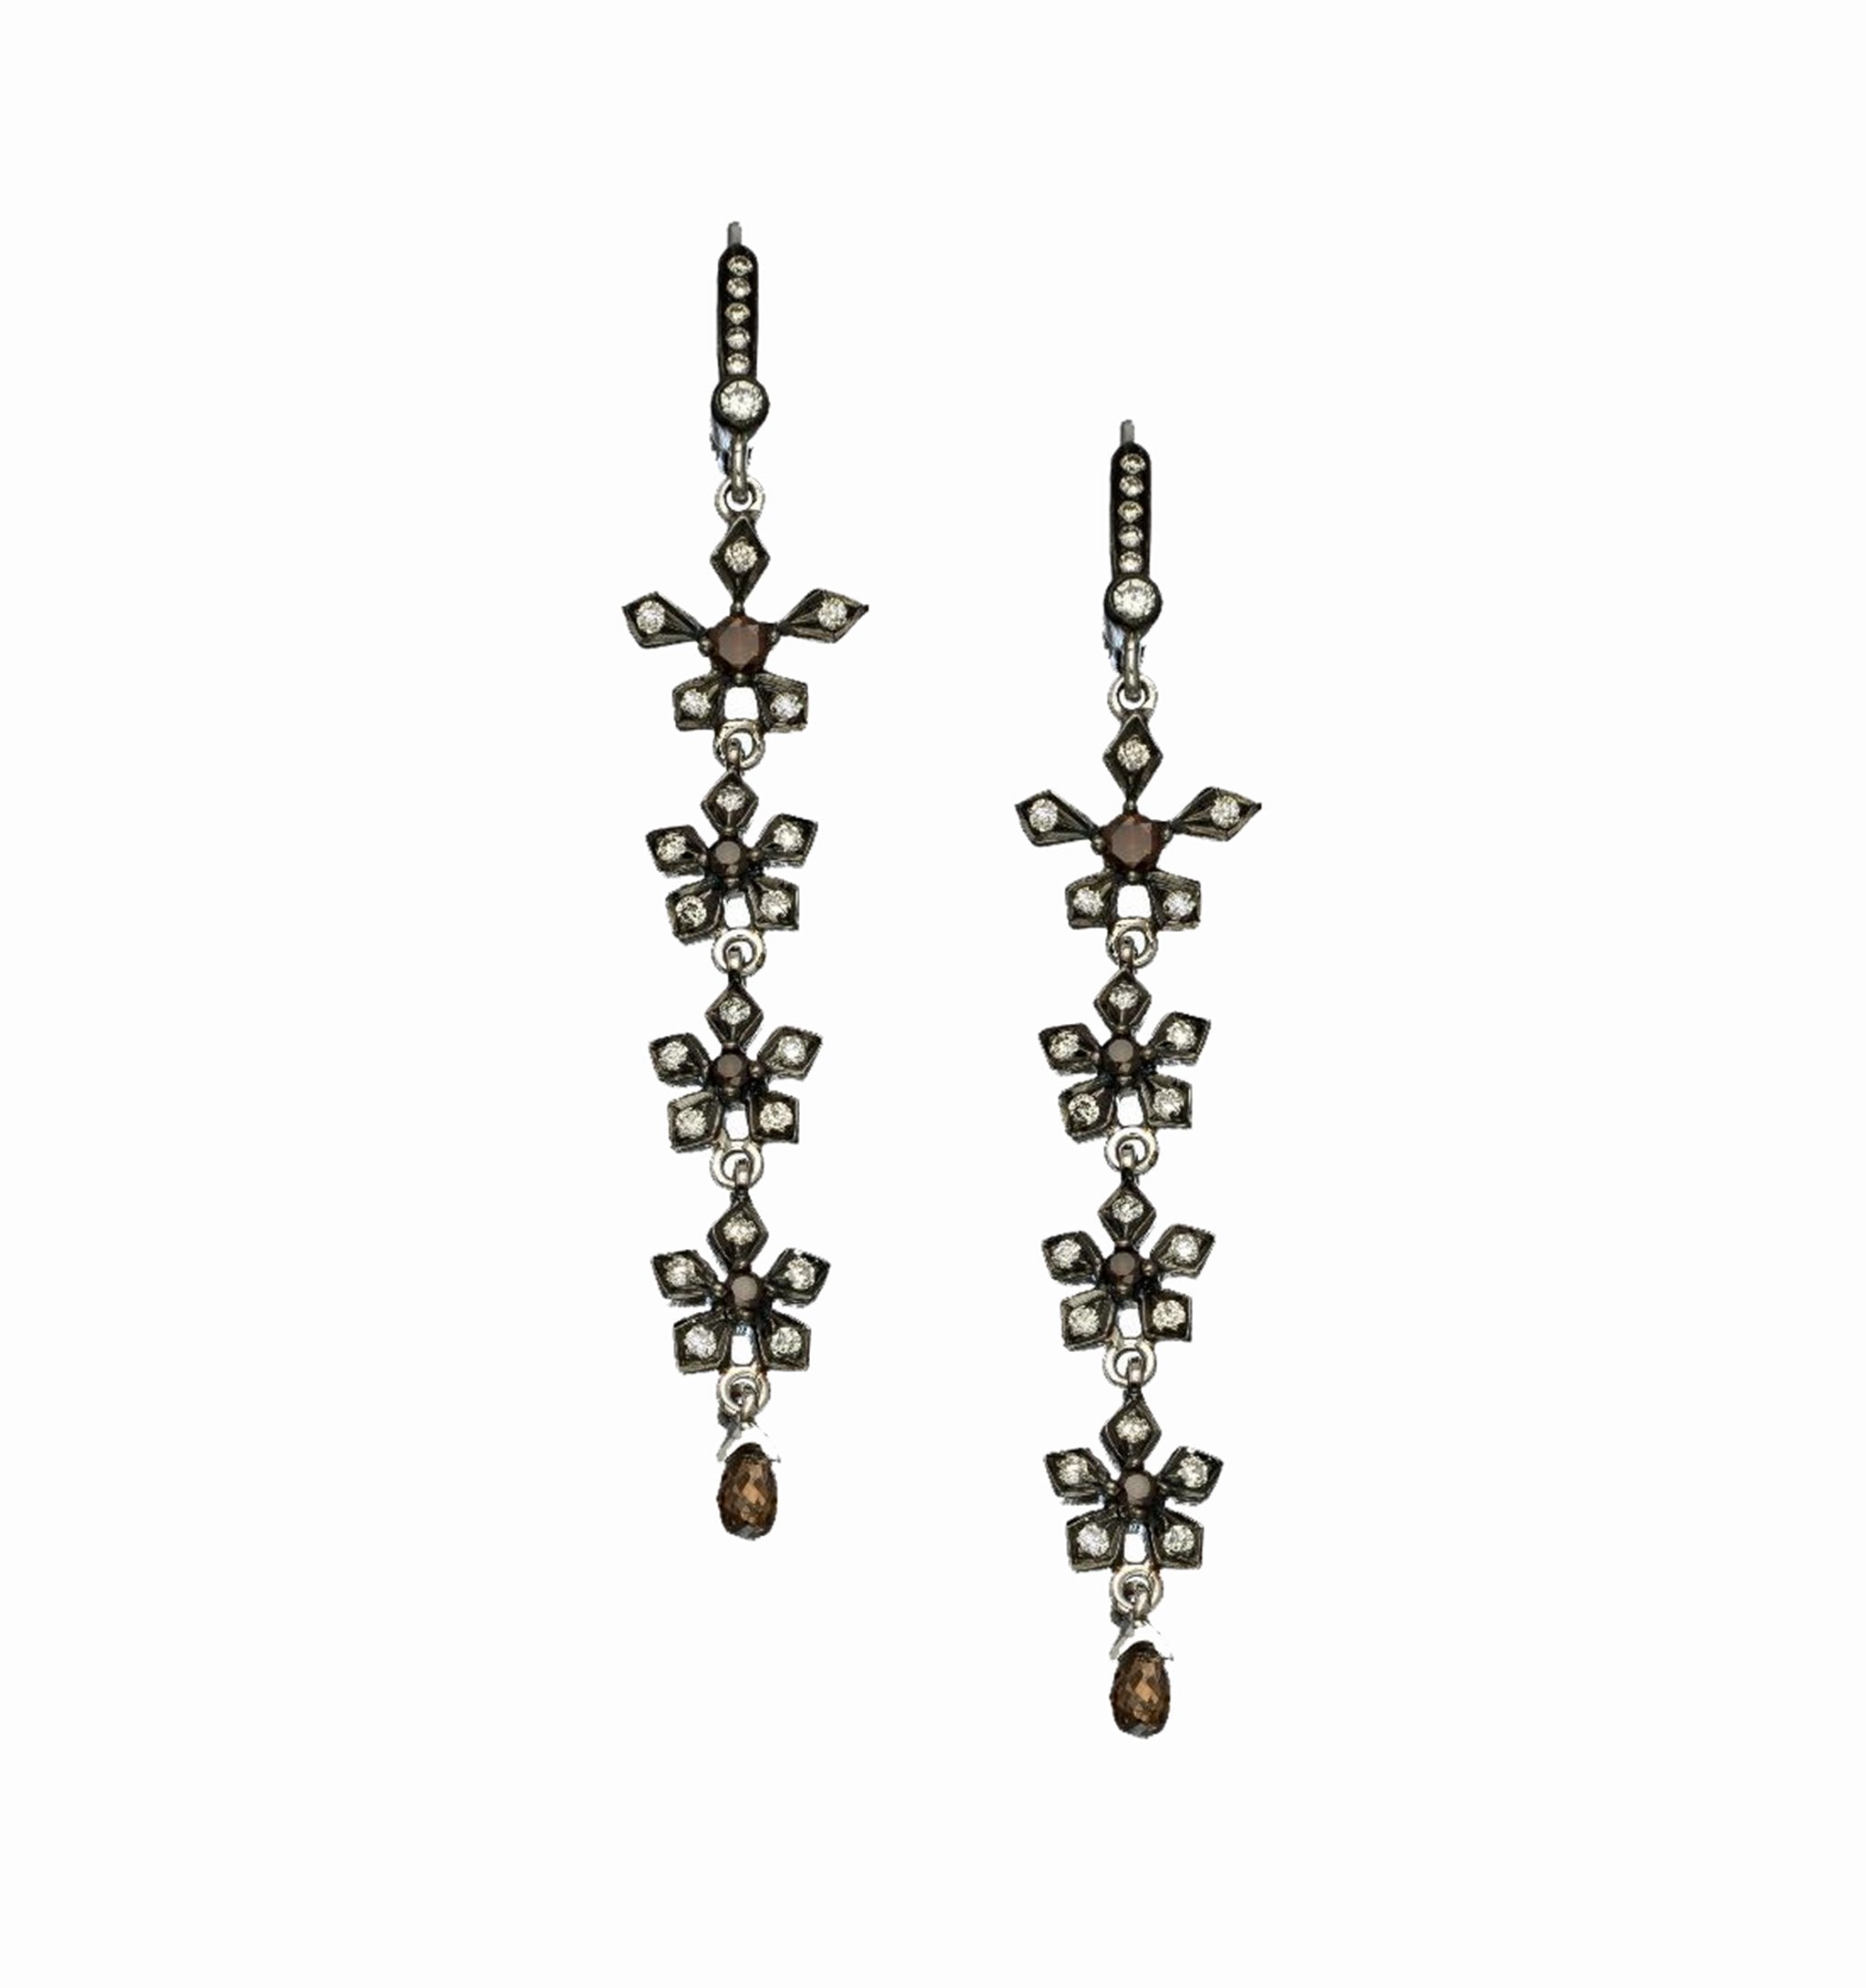 Enchanted Garden White and Champagne Diamond Linear Earrings